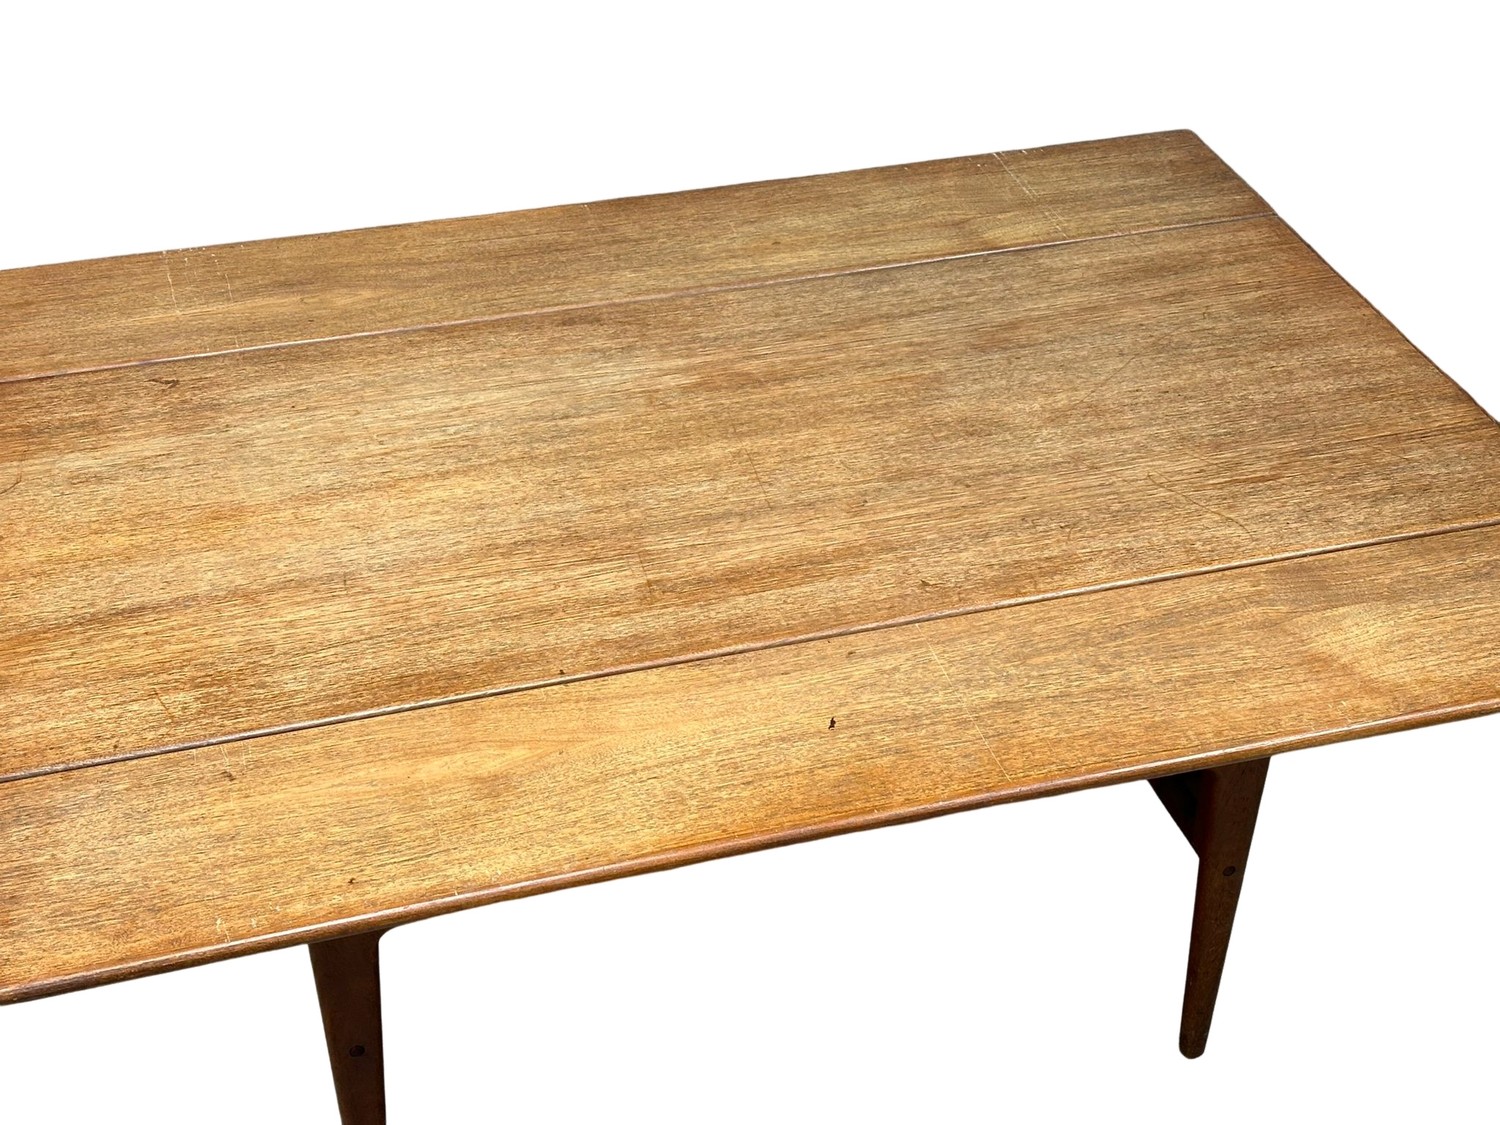 A Danish Mid Century teak ‘Elevator’ table designed by Kai Kristensen. Coffee table/dining table. - Image 7 of 8